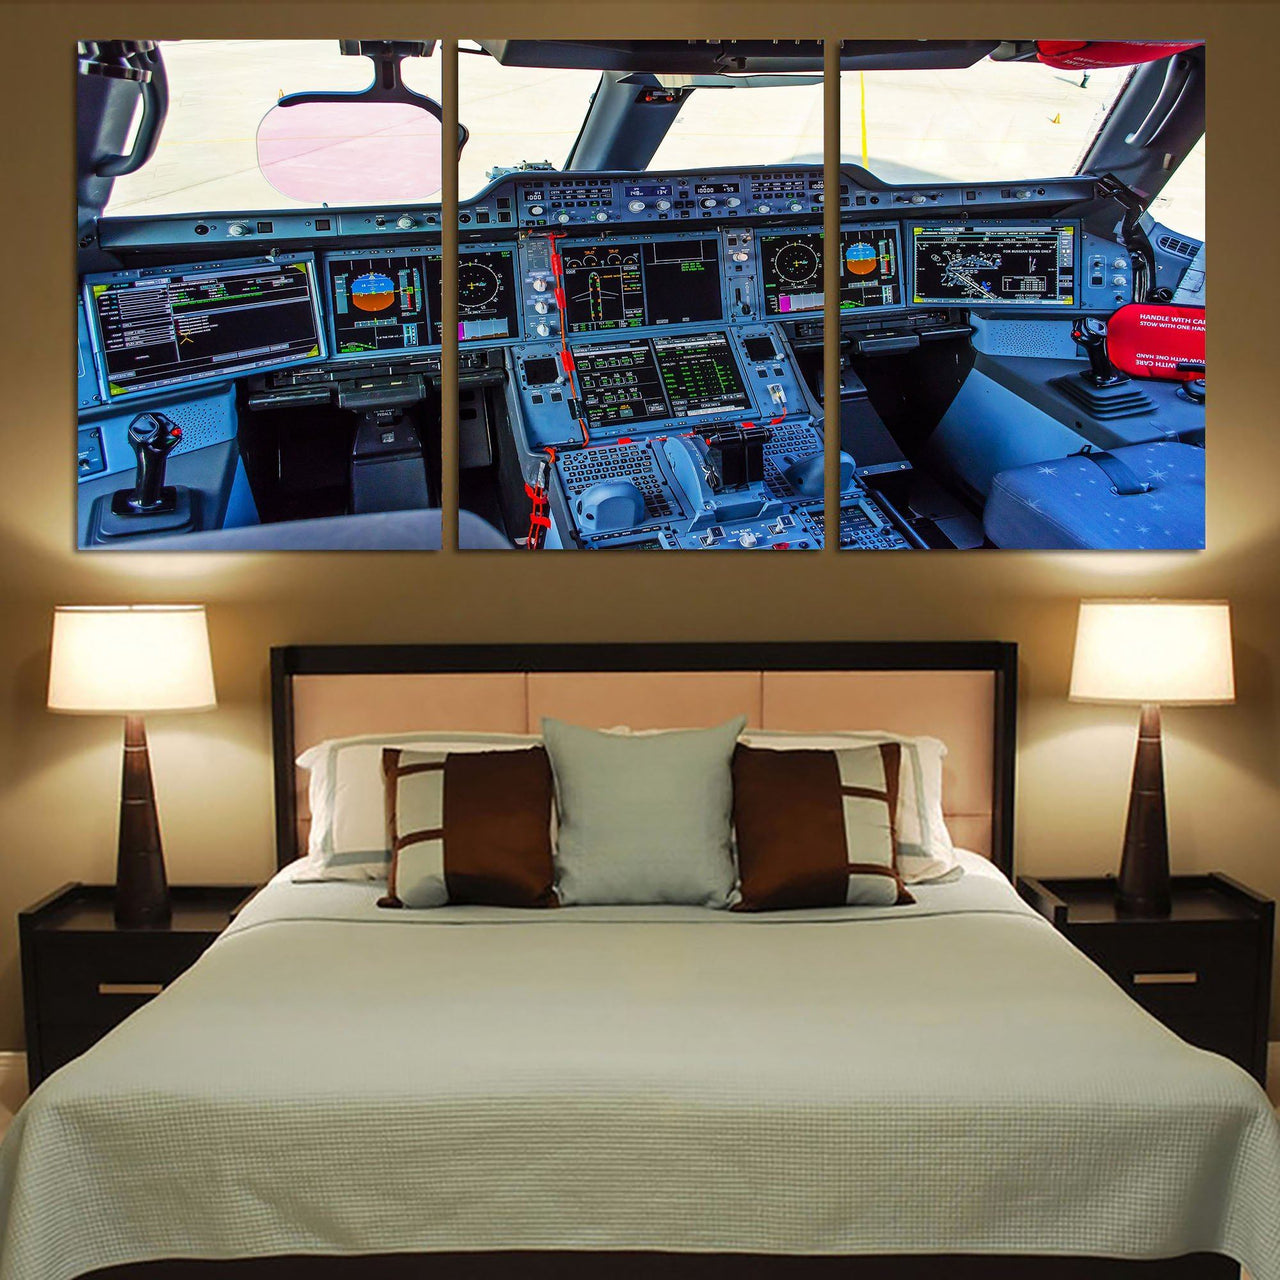 Airbus A350 Cockpit Printed Canvas Posters (3 Pieces) Aviation Shop 